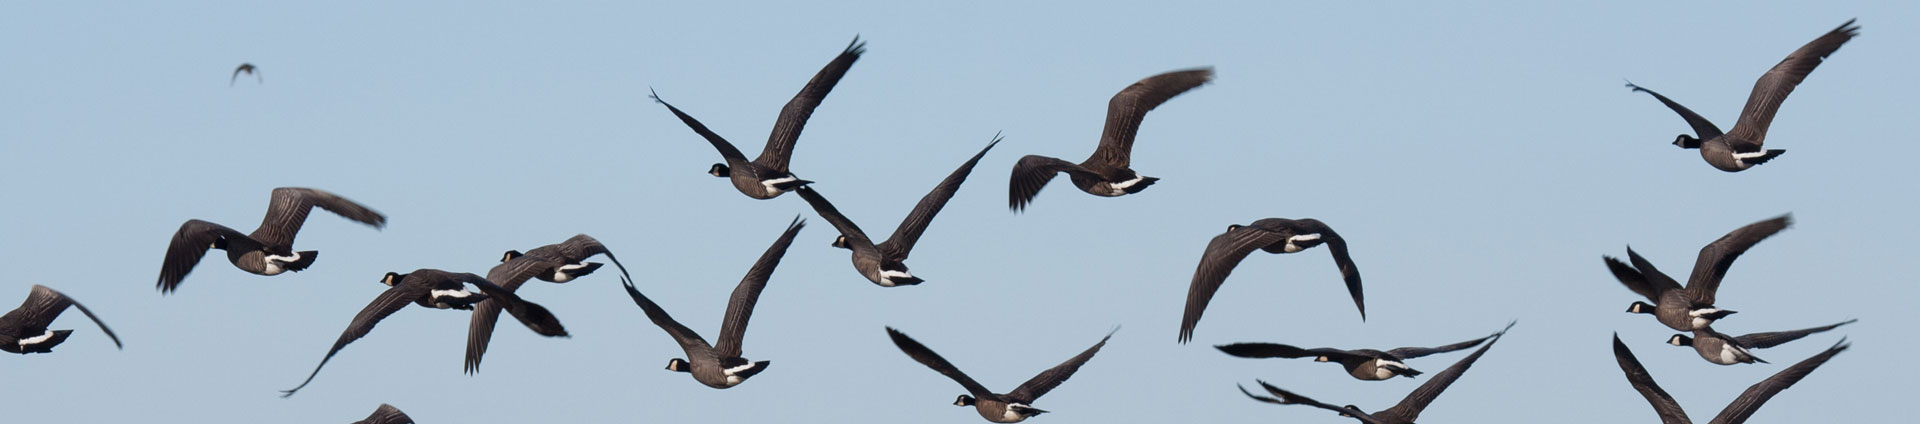 header image of birds flying over nisqually